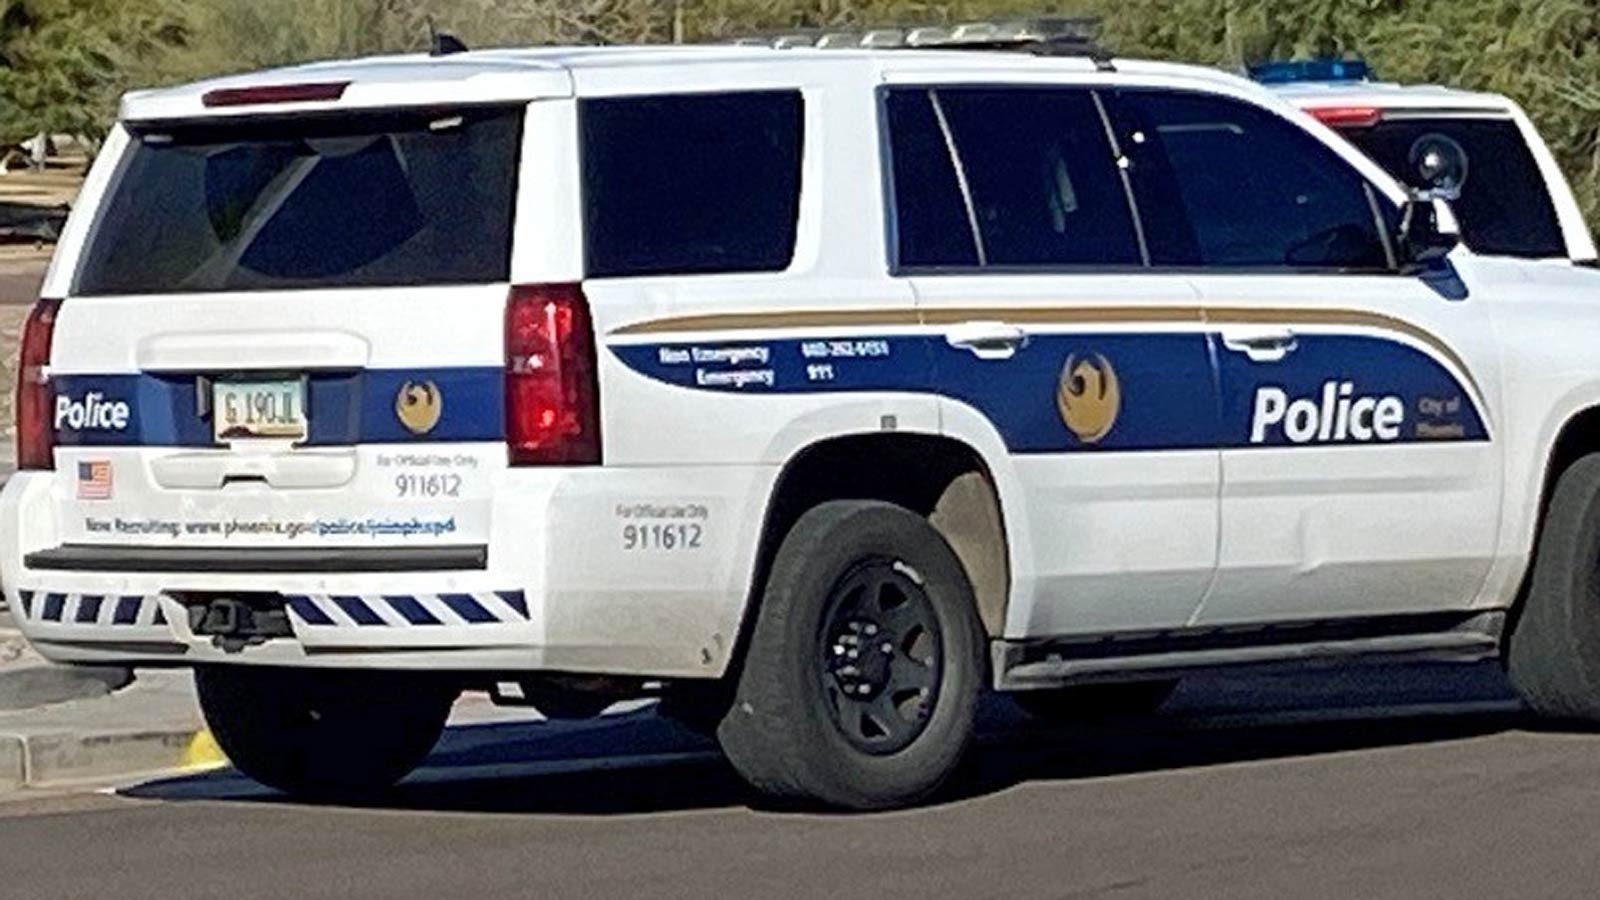 File photo of Phoenix police SUVs parked on the side of a road...